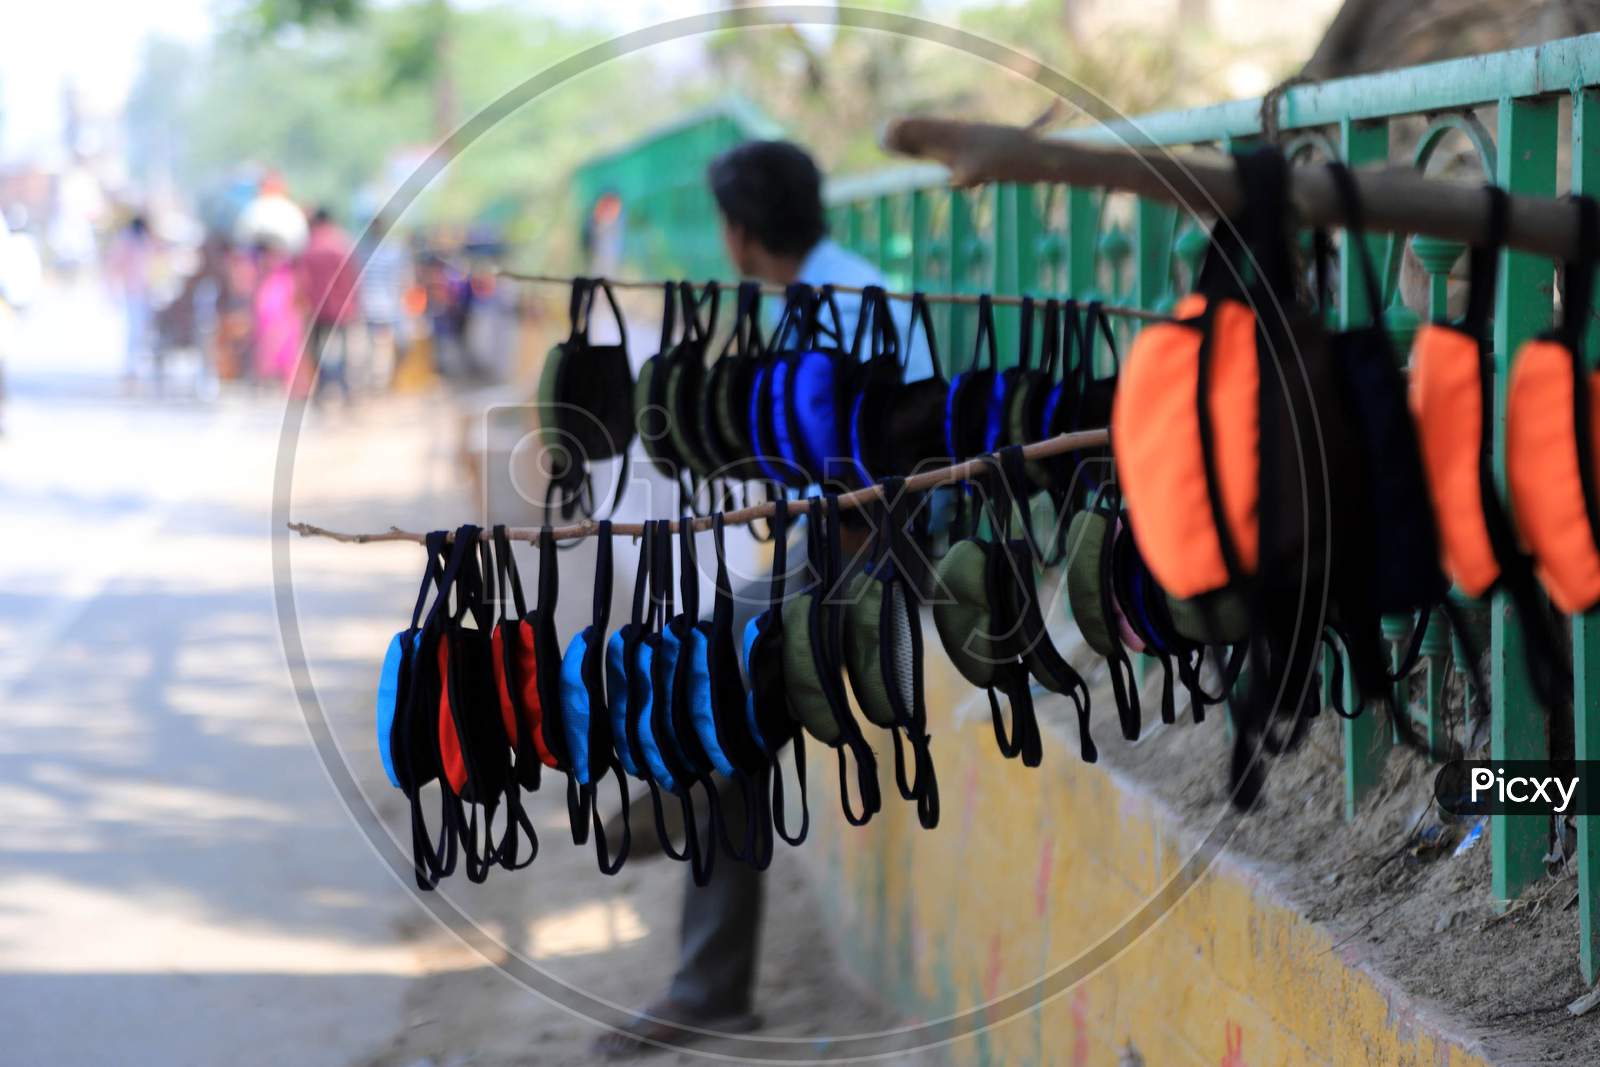 Masks hanging for sale on the road side during an extended nationwide lockdown to slow the spread of the Coronavirus disease or COVID-19, in Prayagraj, May 4, 2020.